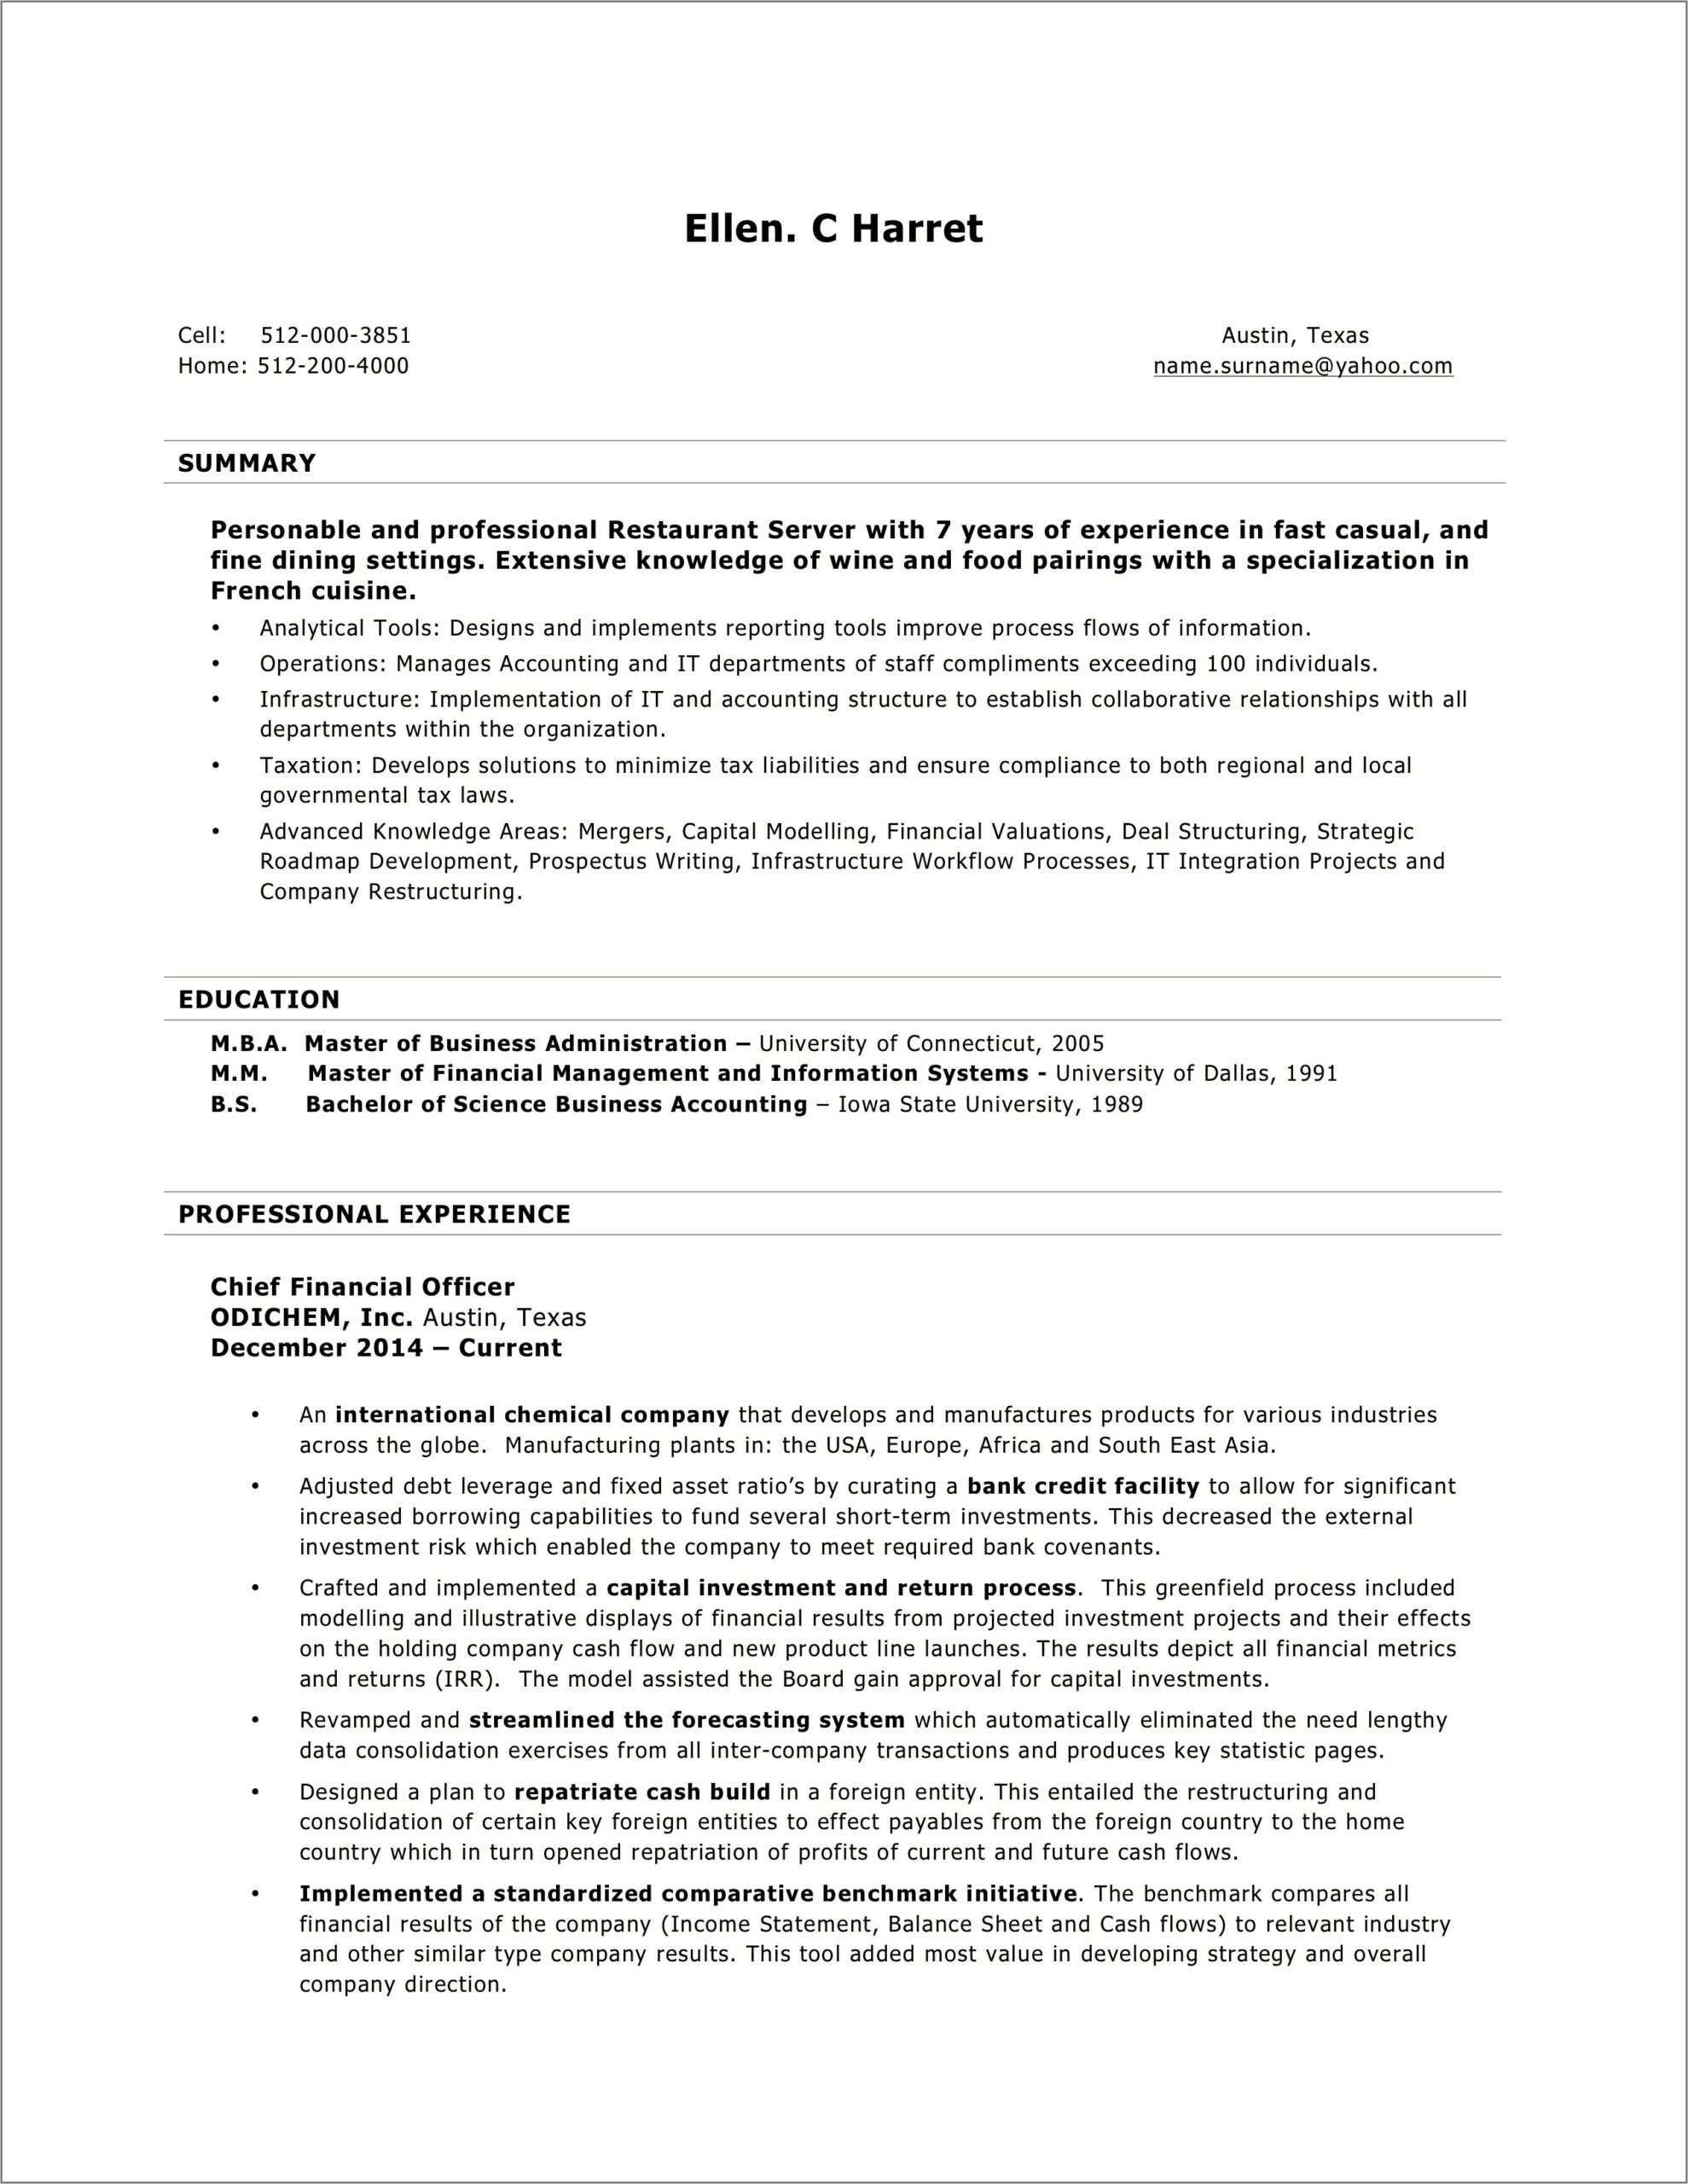 Sample Resume Format For Experienced Finance Professionals